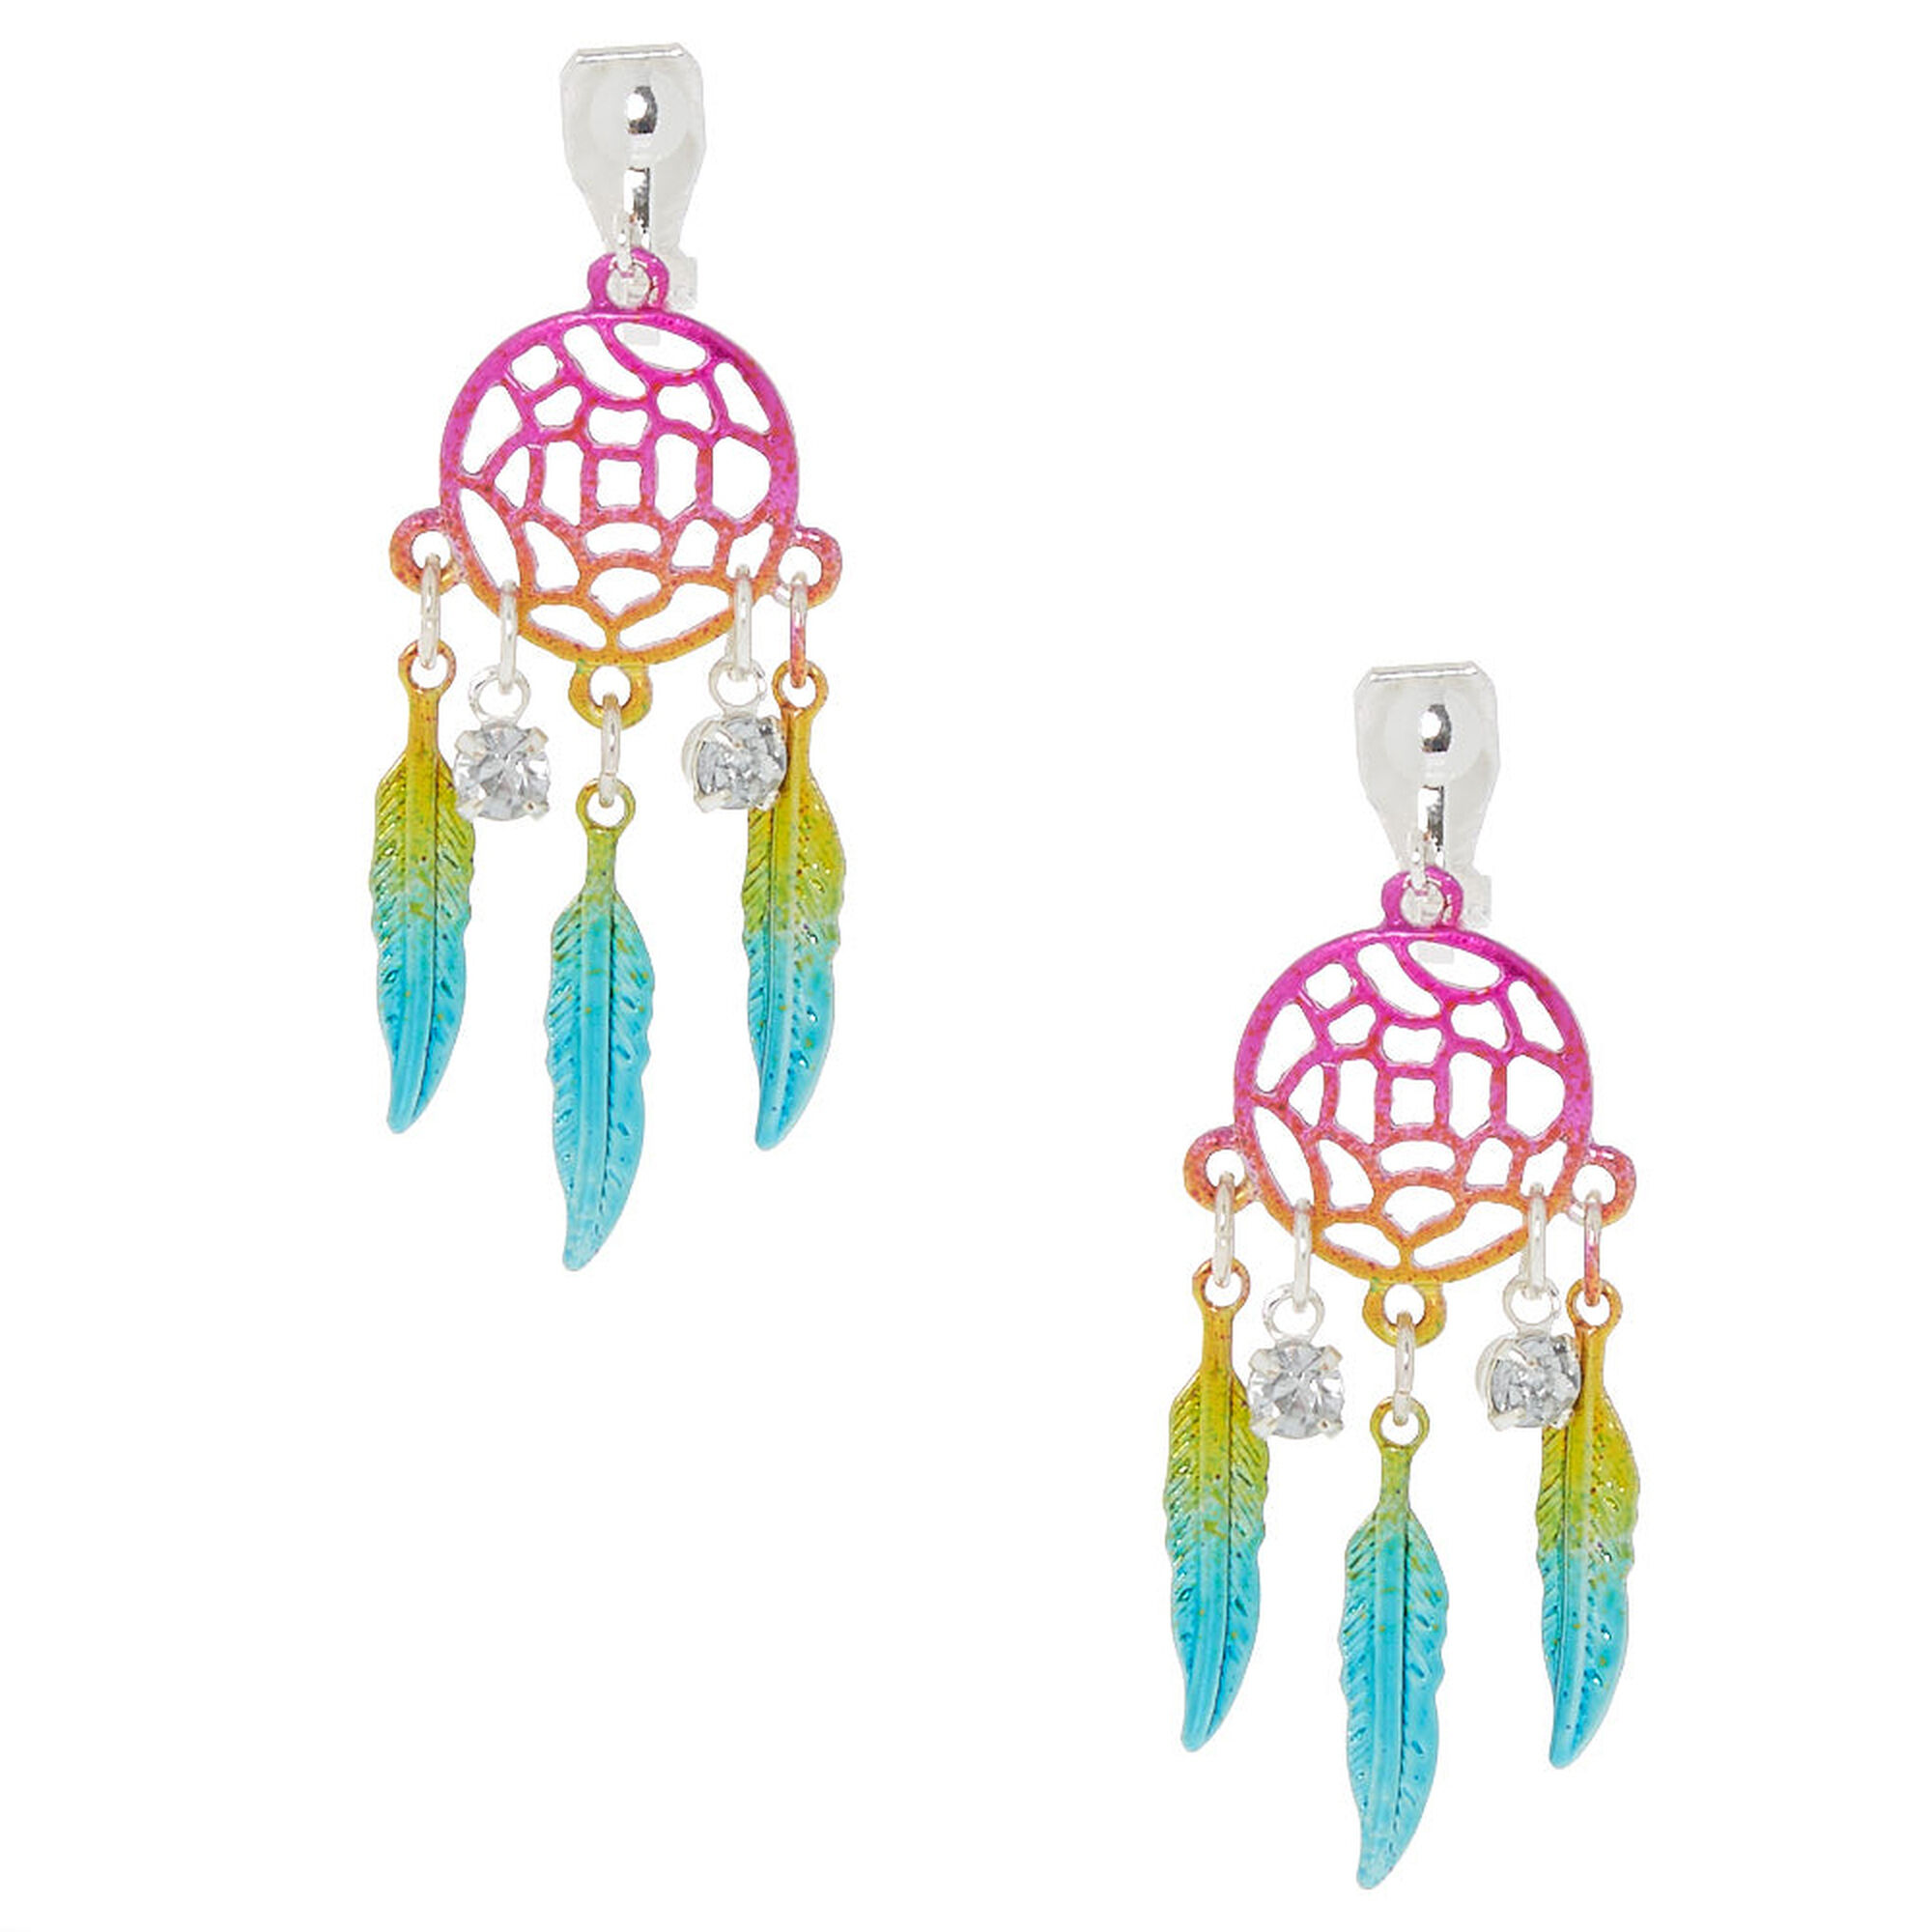 View Claires 15 Rainbow Dreamcatcher Clip On Earrings Silver information